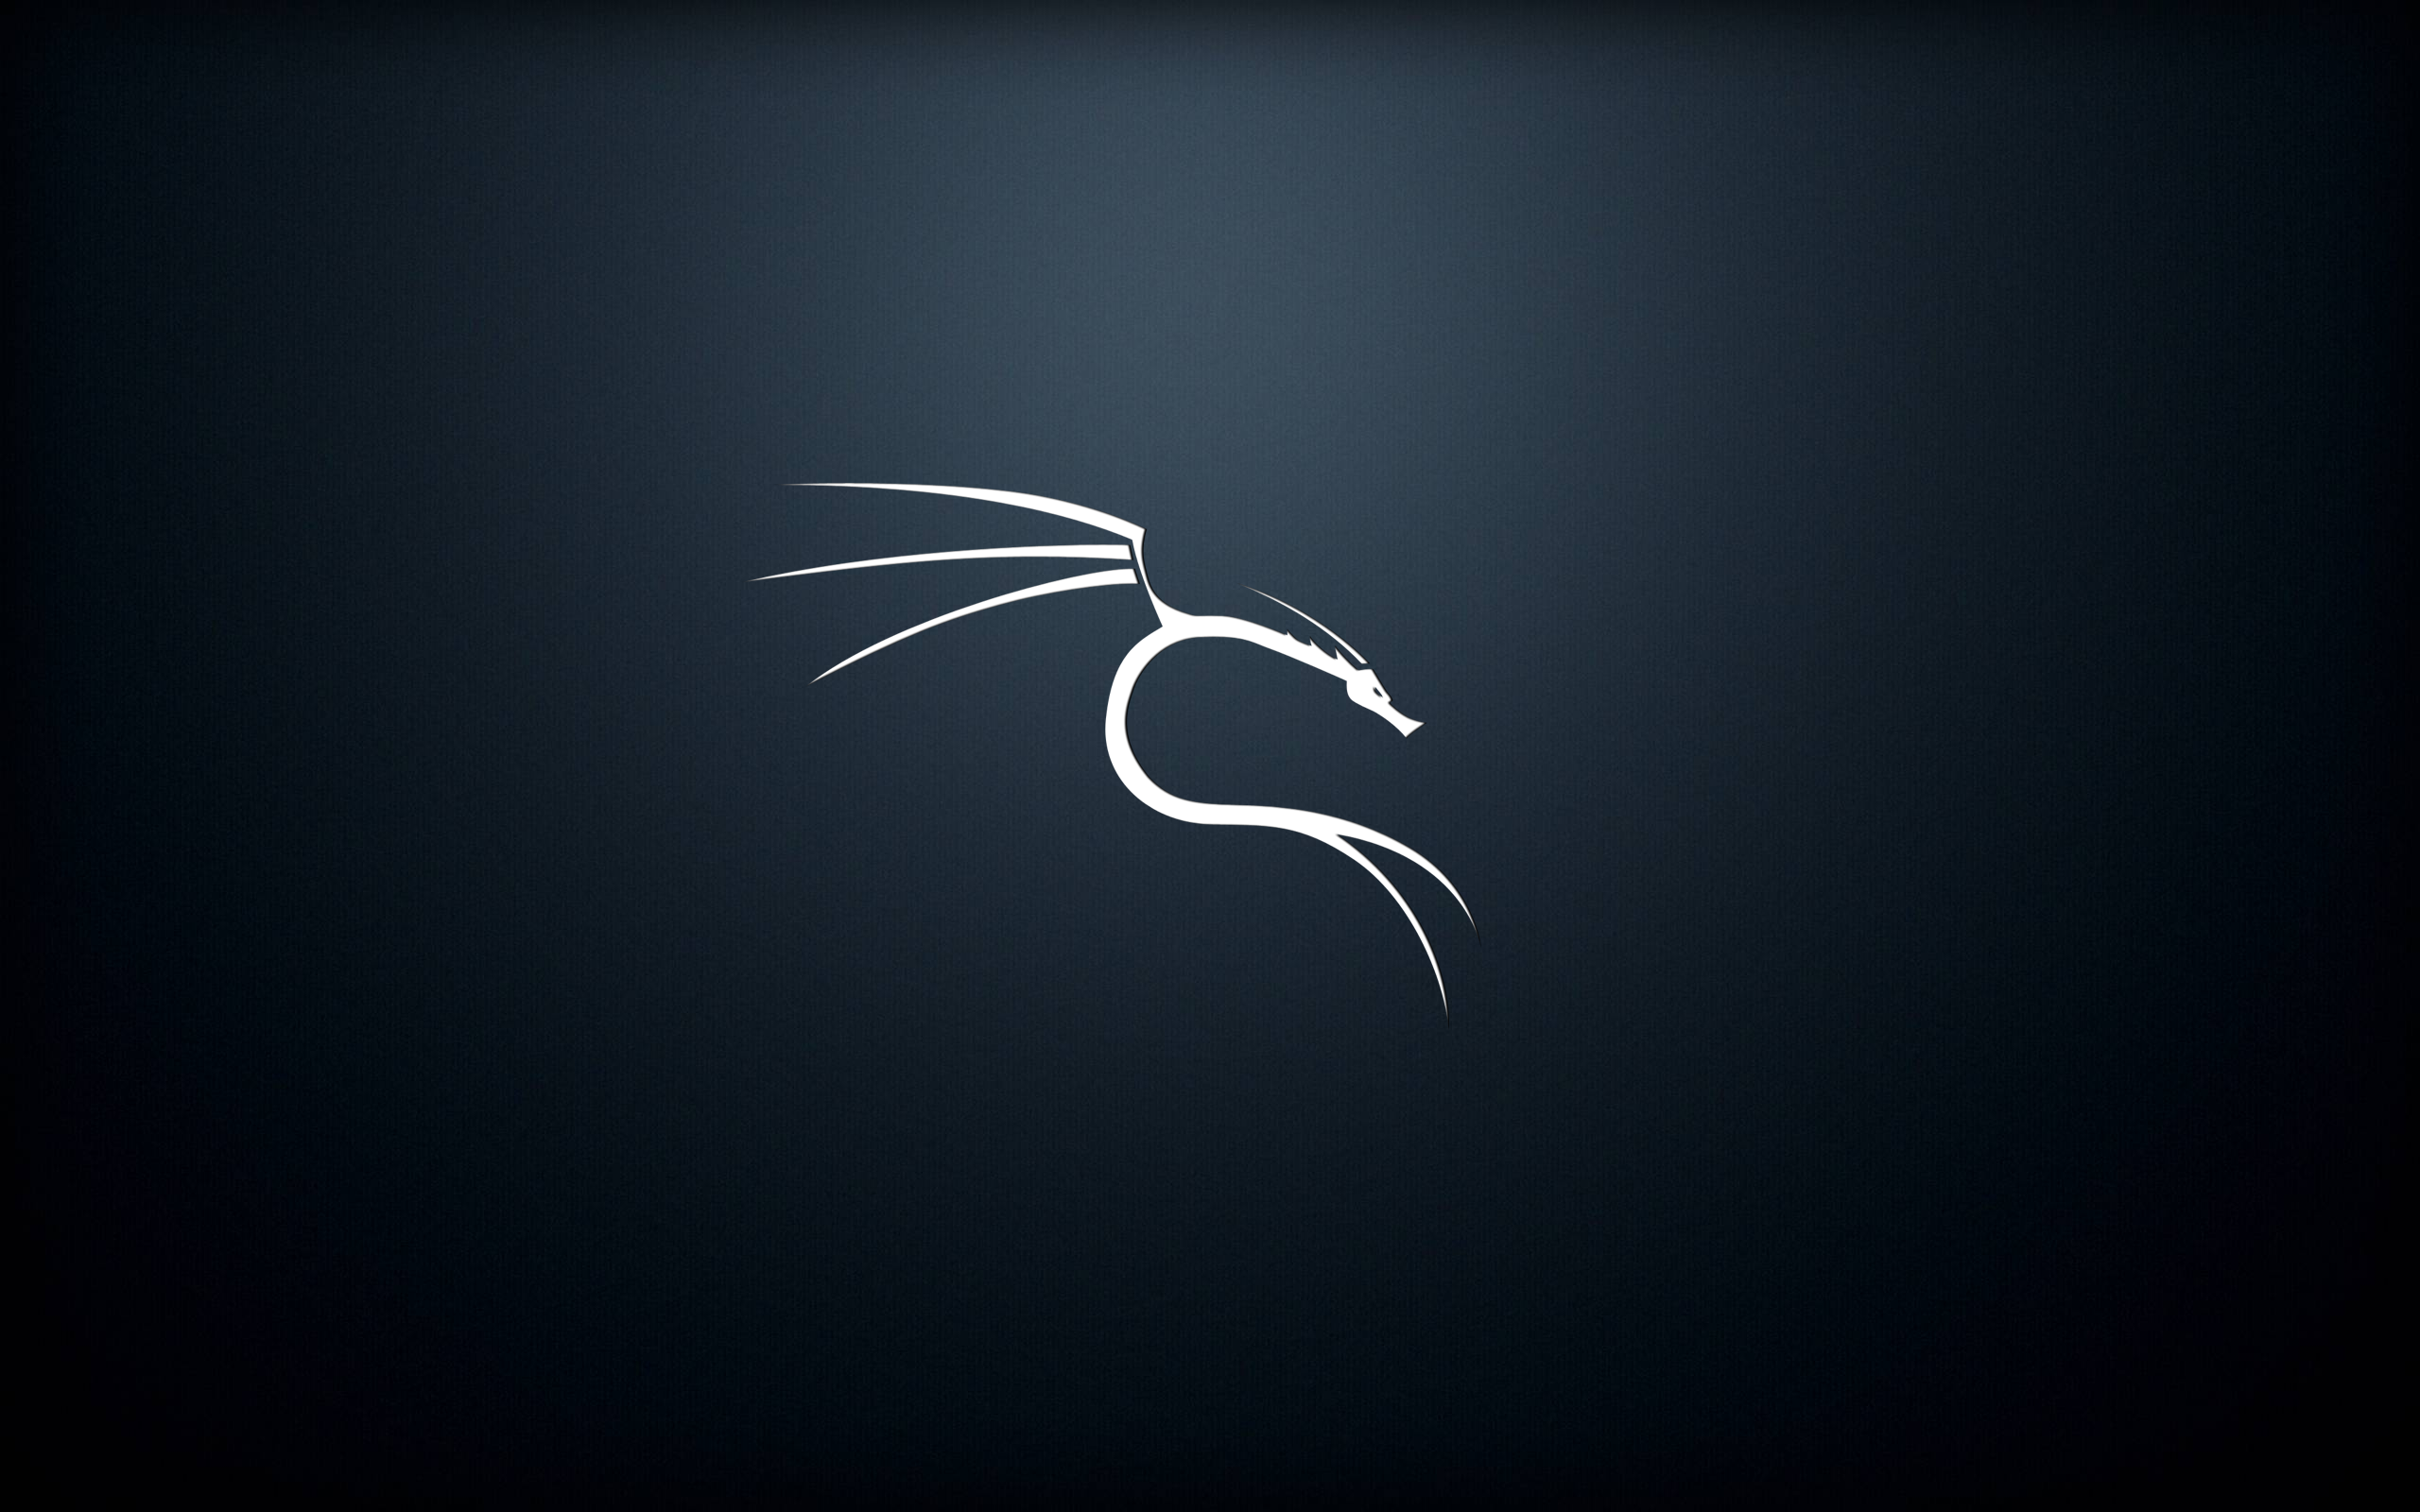 GitHub - dorianpro/kali-linux-wallpapers: A set of dedicated Kali Linux*  wallpapers which I'm going to update regularly. They all done using GIMP  and other GNU/Linux/FOSS.